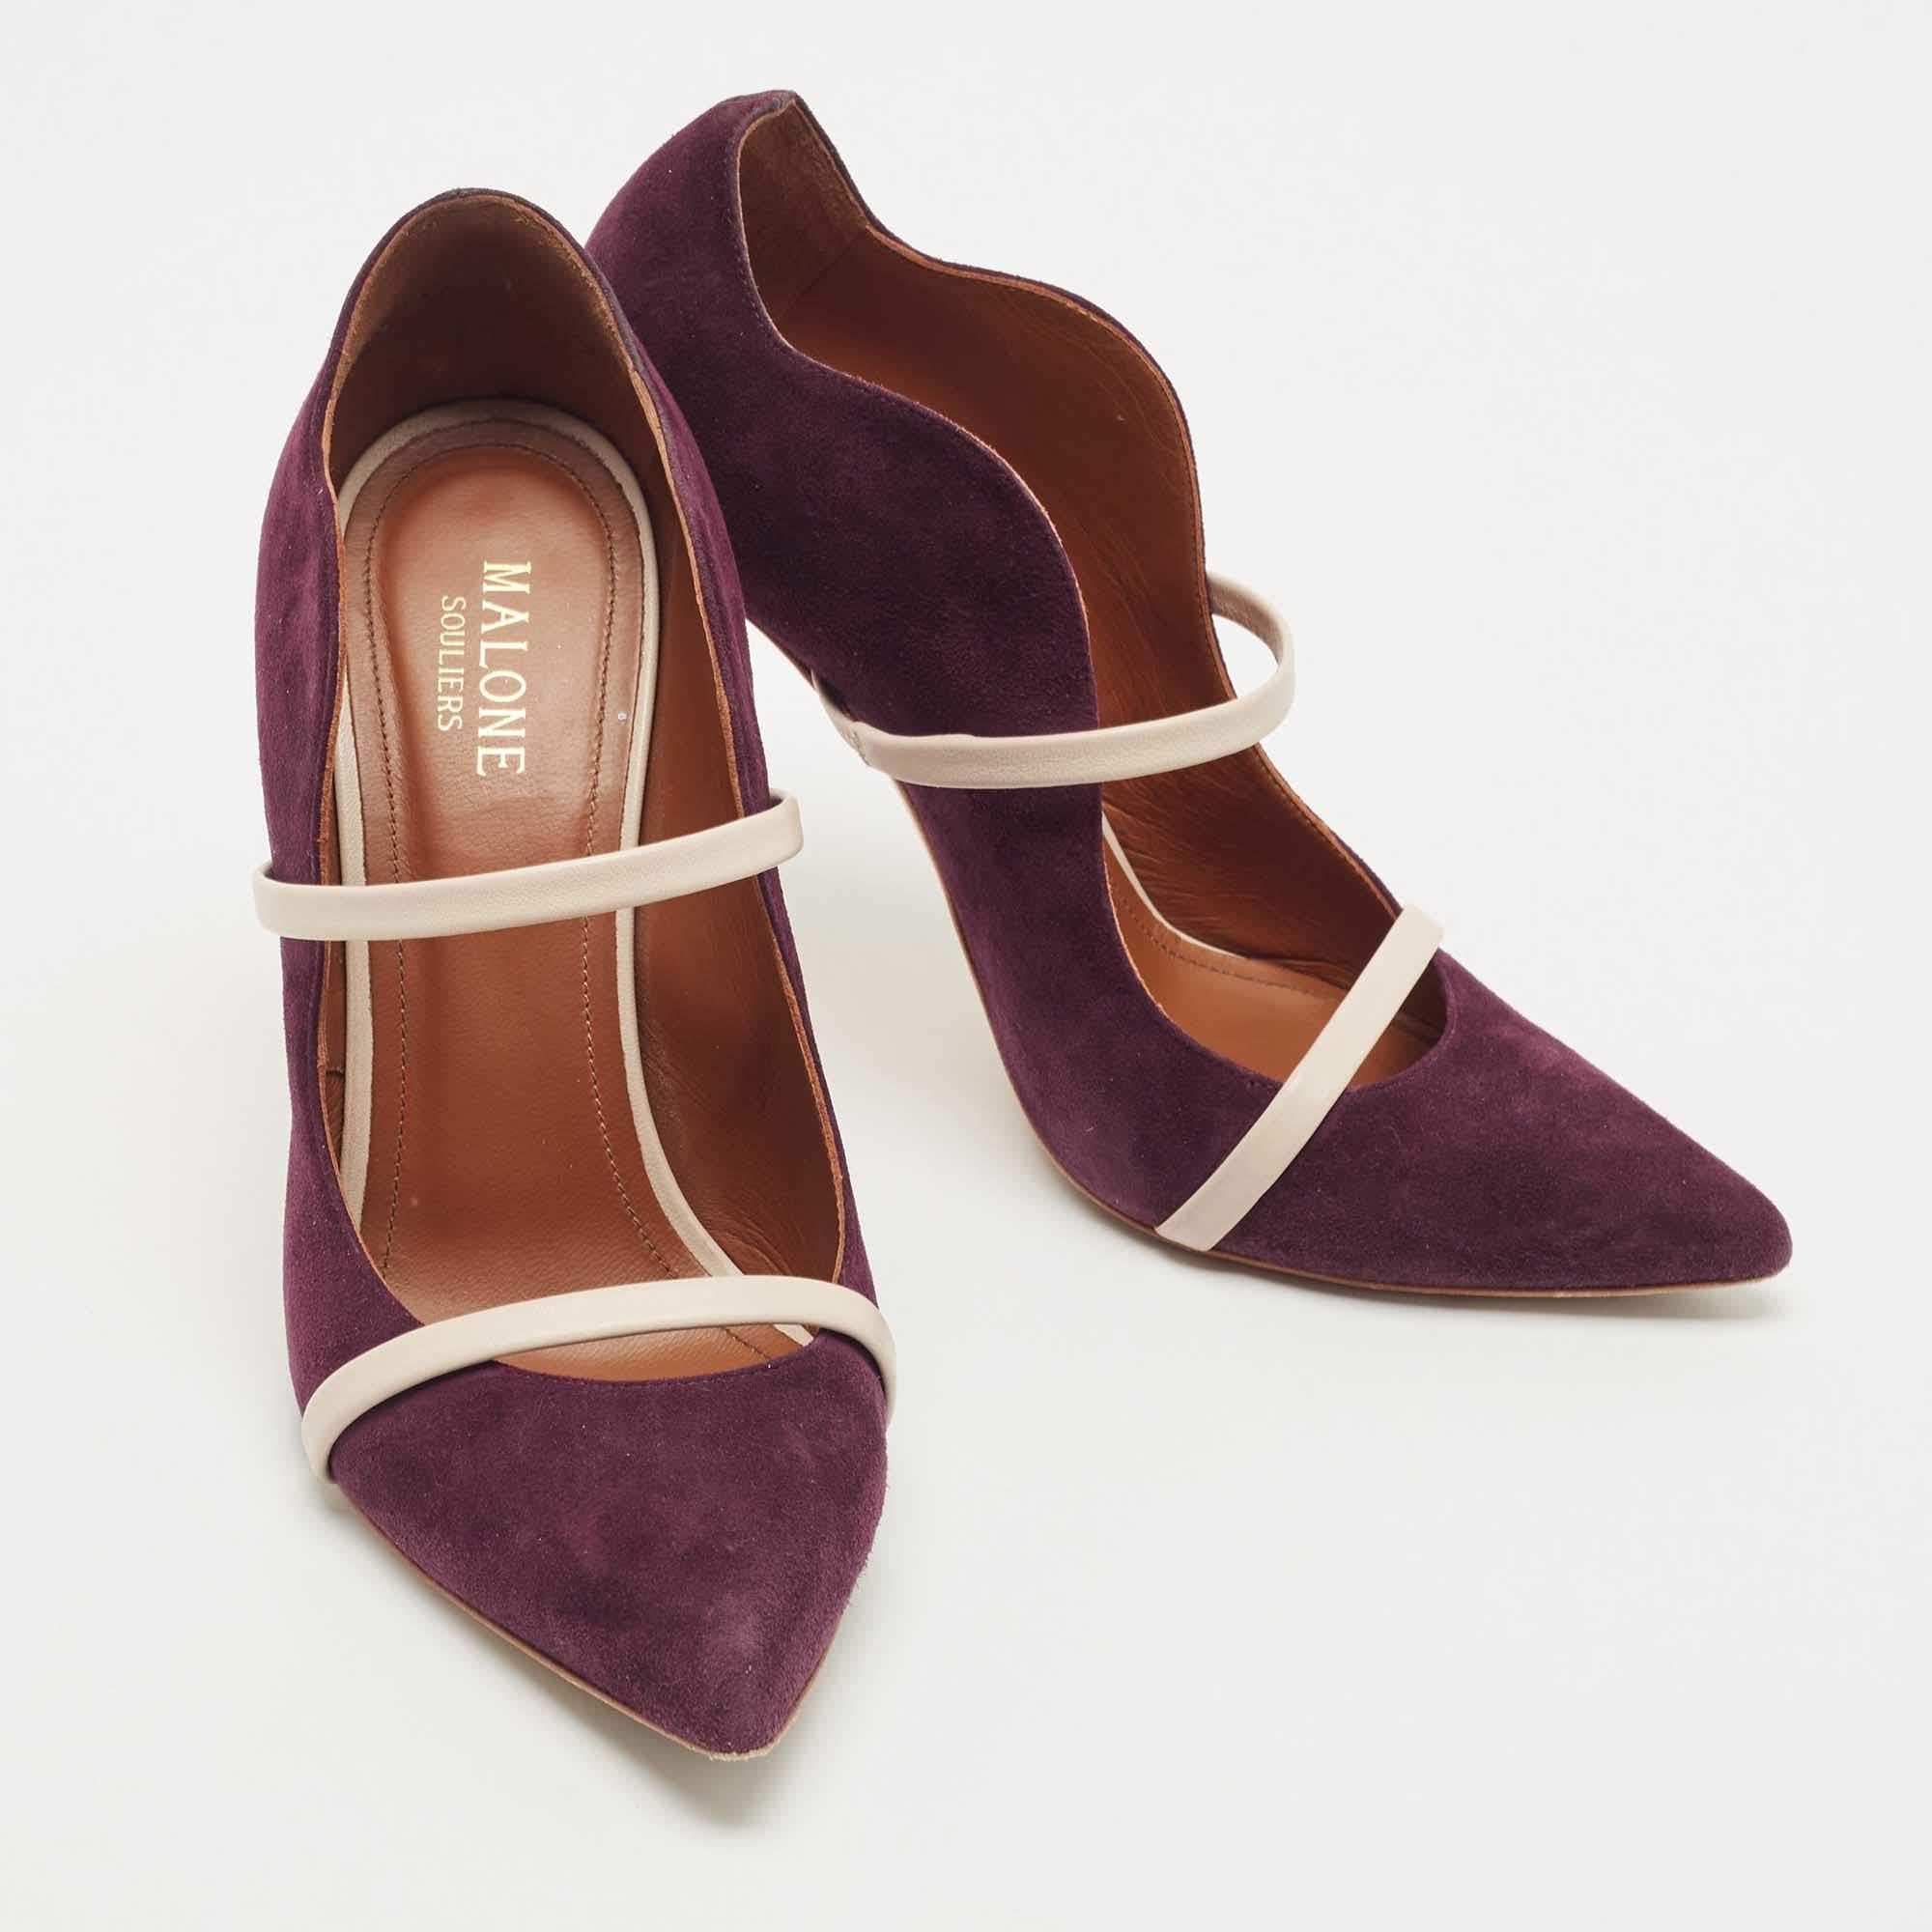 Malone Souliers Burgundy/Beige Suede and Leather Maureen Pumps Size 38 In Good Condition For Sale In Dubai, Al Qouz 2